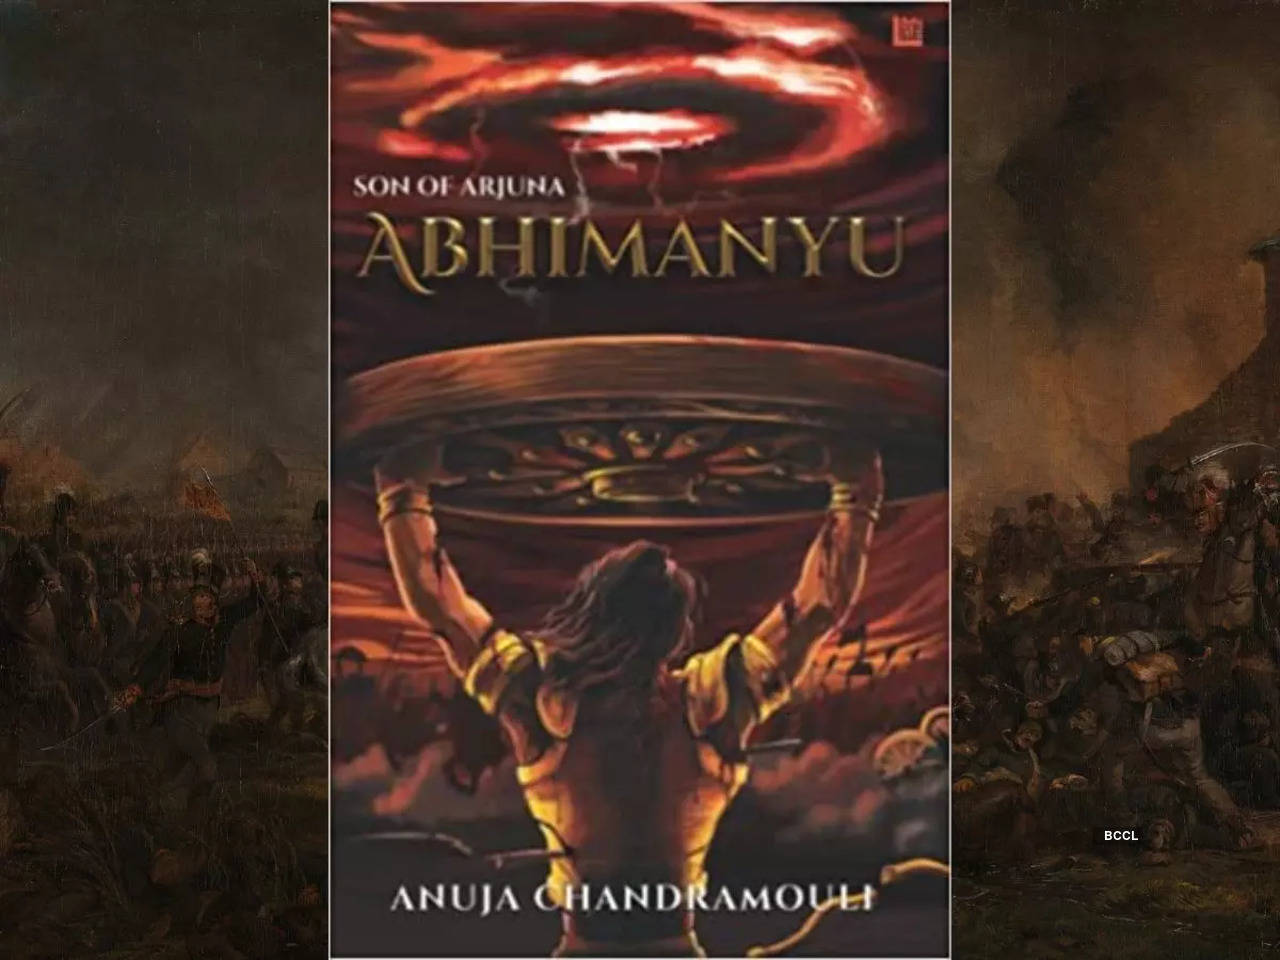 Micro review: 'Abhimanyu' by Anuja Chandramouli - Times of India